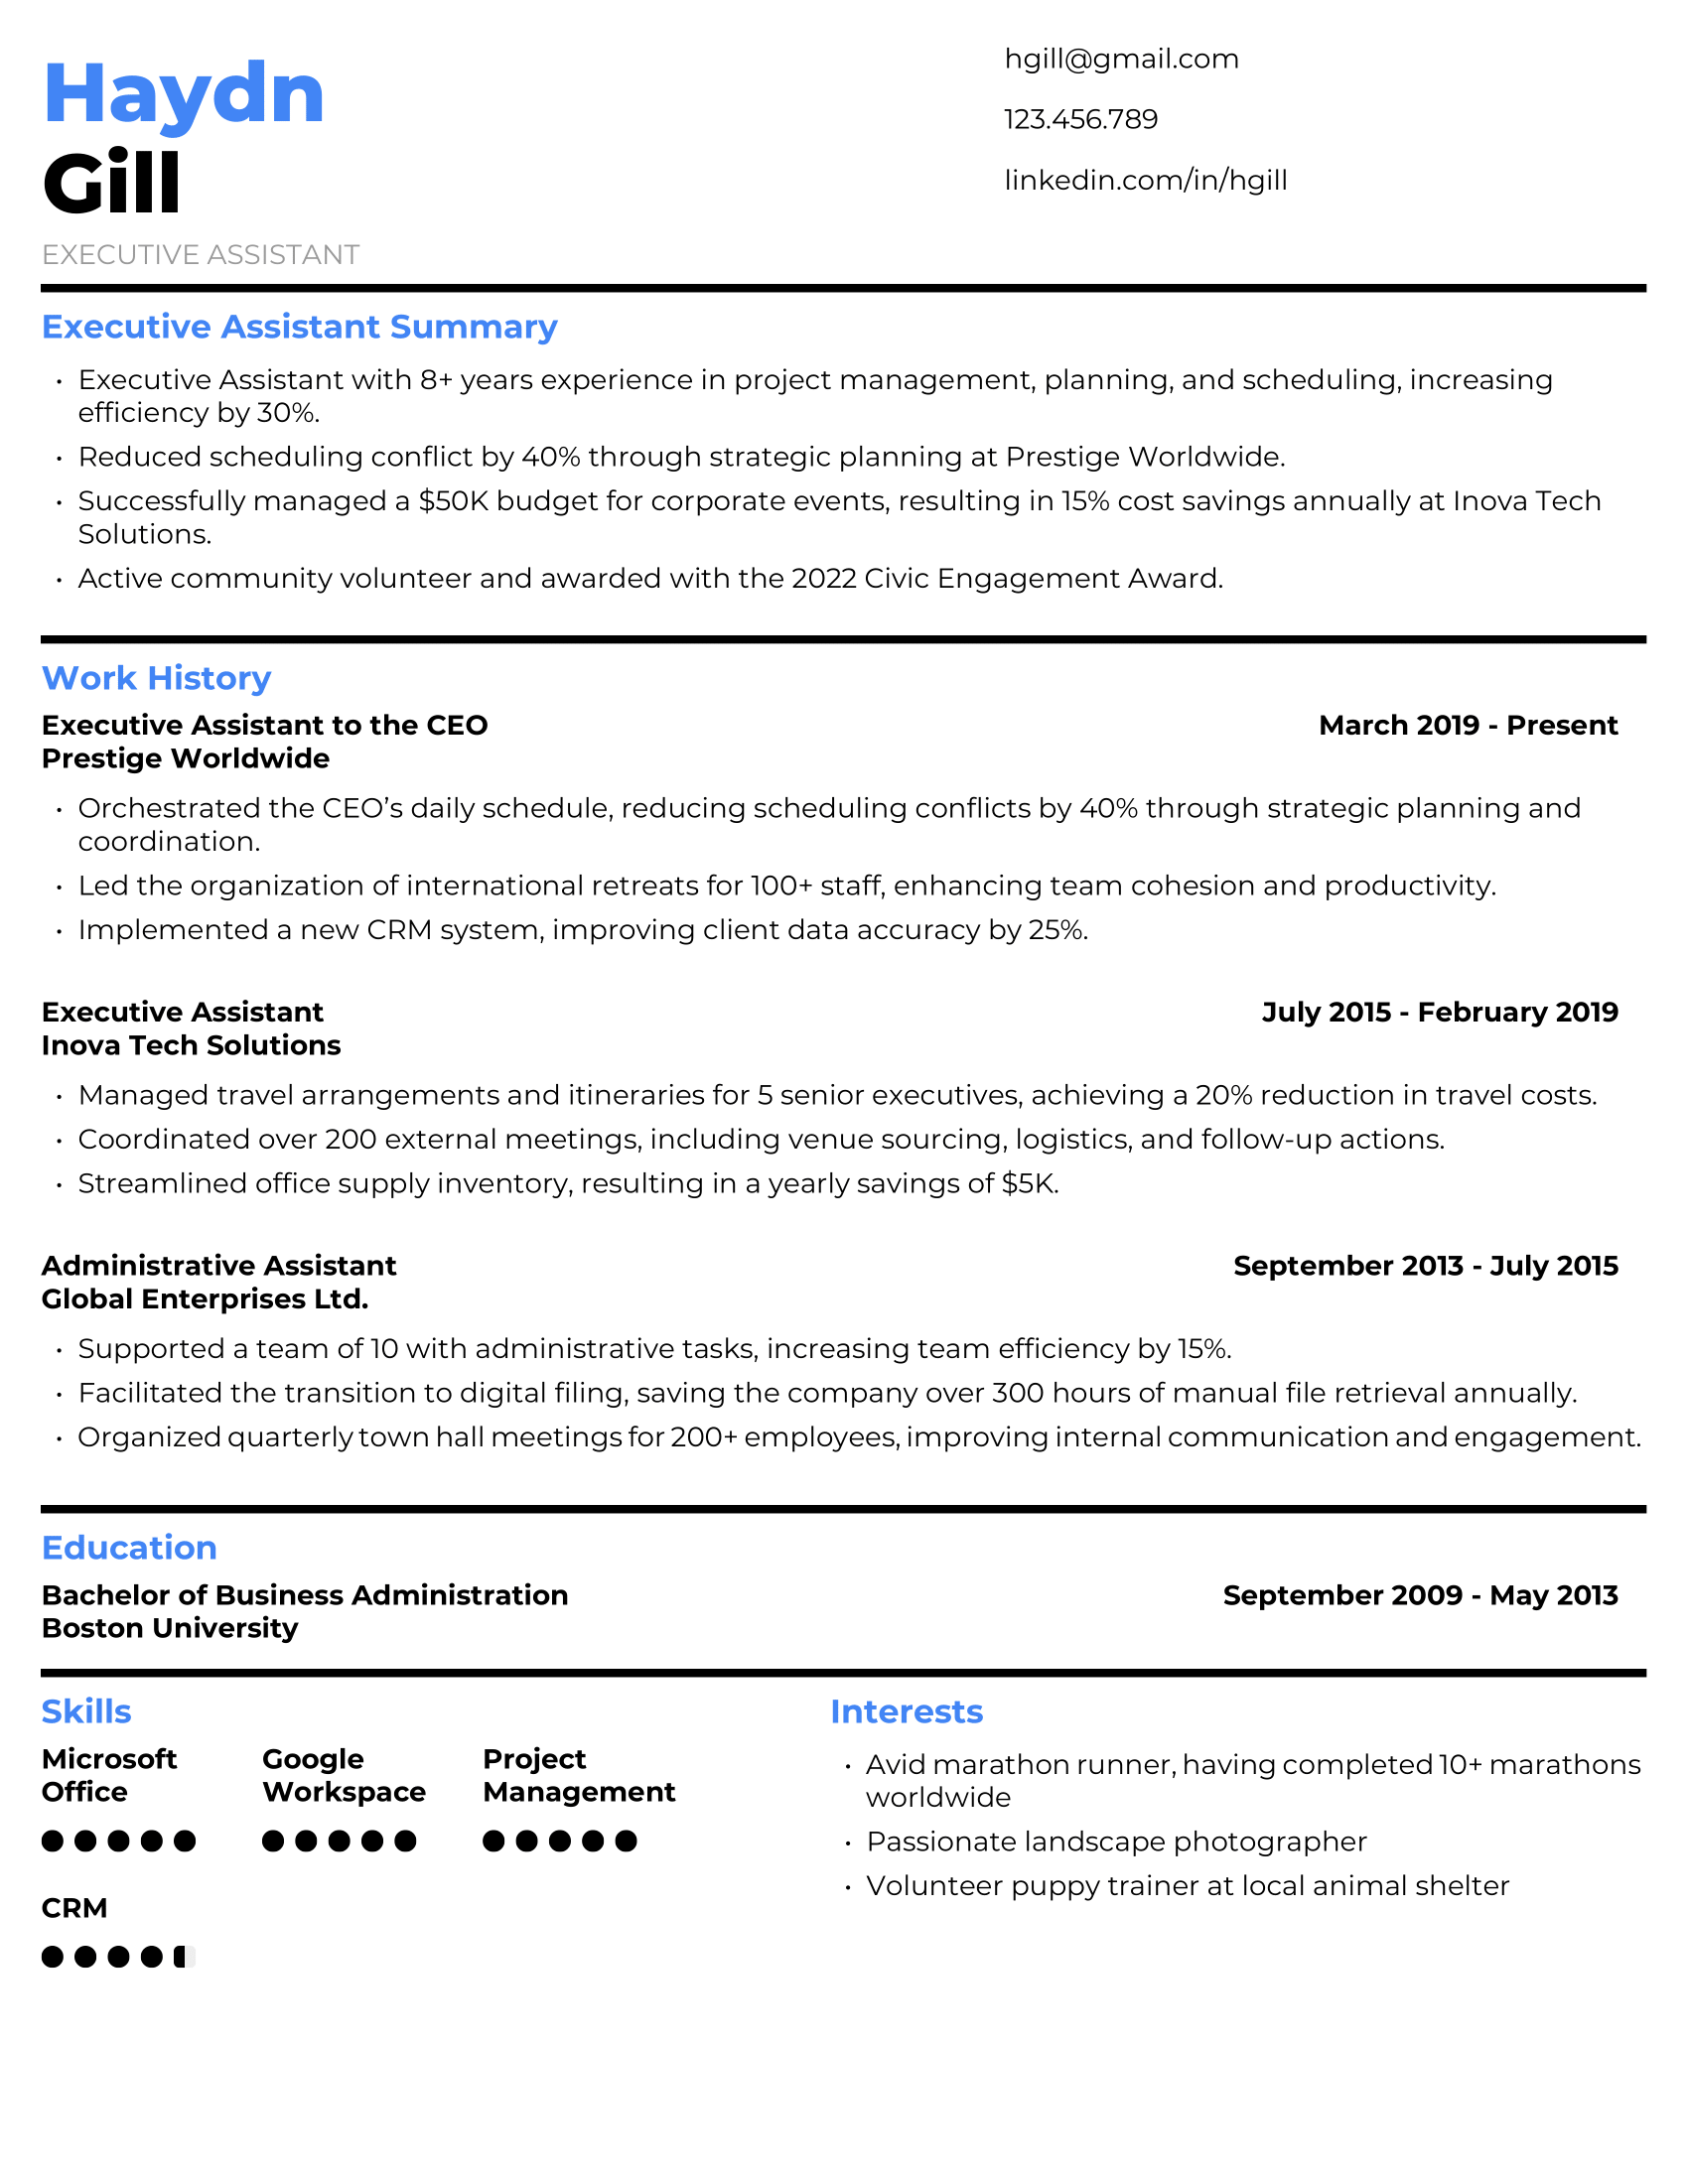 Executive Assistant Resume Example #1 - Traditional